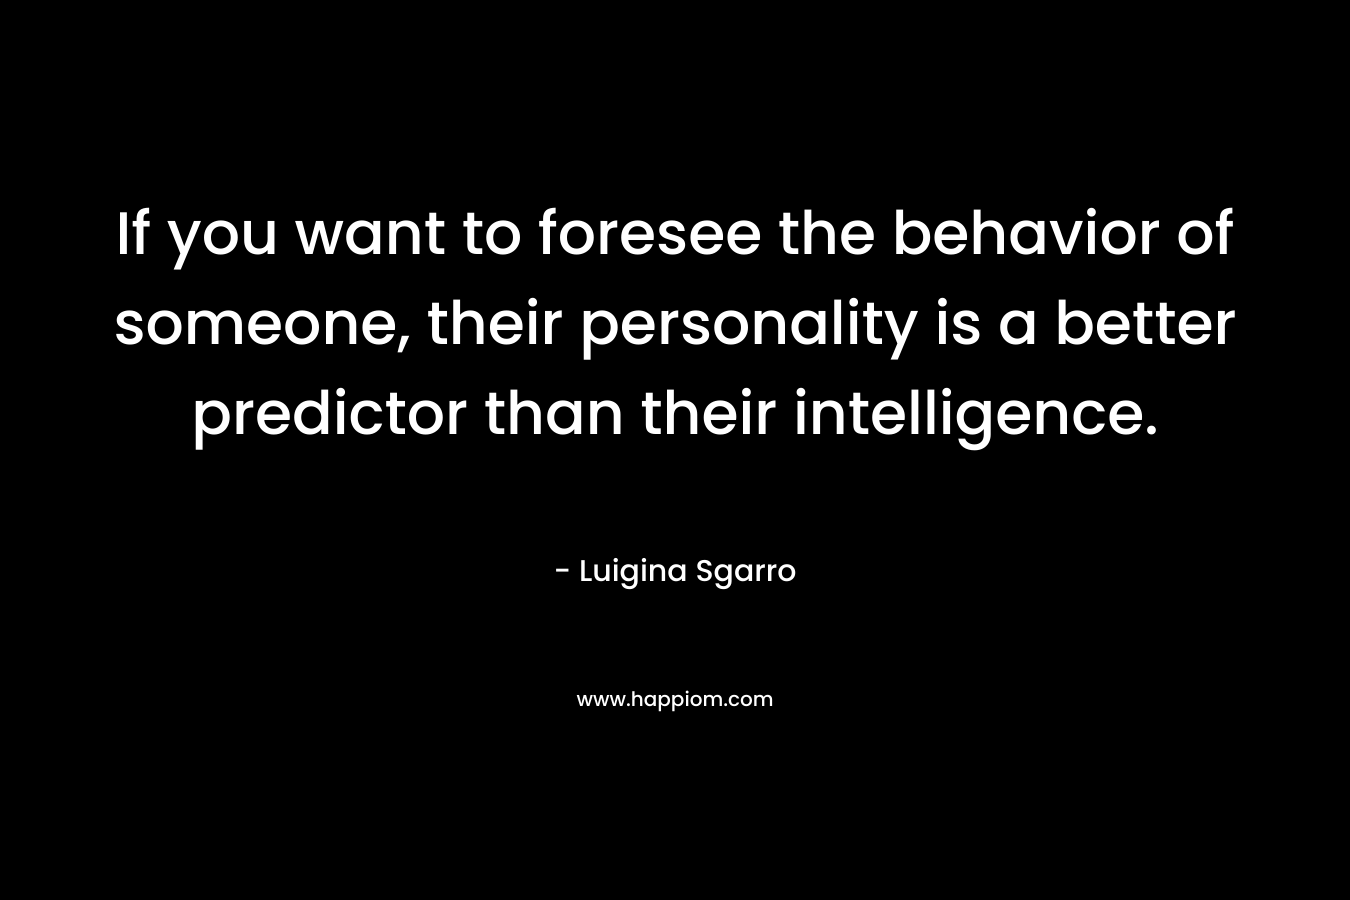 If you want to foresee the behavior of someone, their personality is a better predictor than their intelligence.